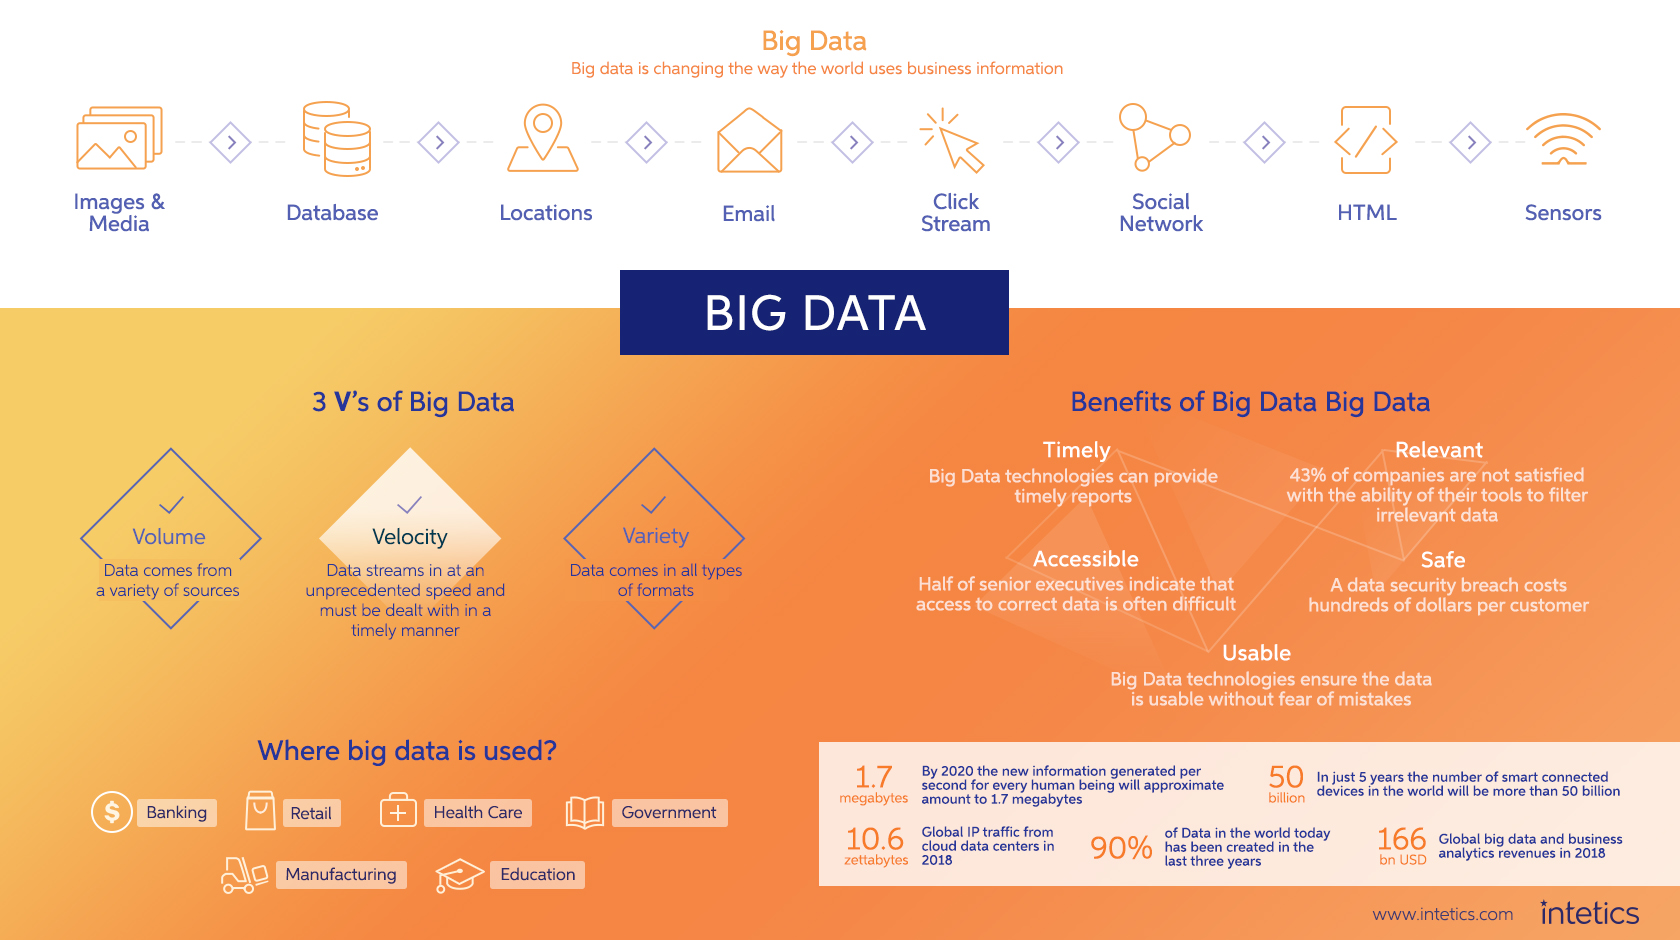 Overview of Big Data